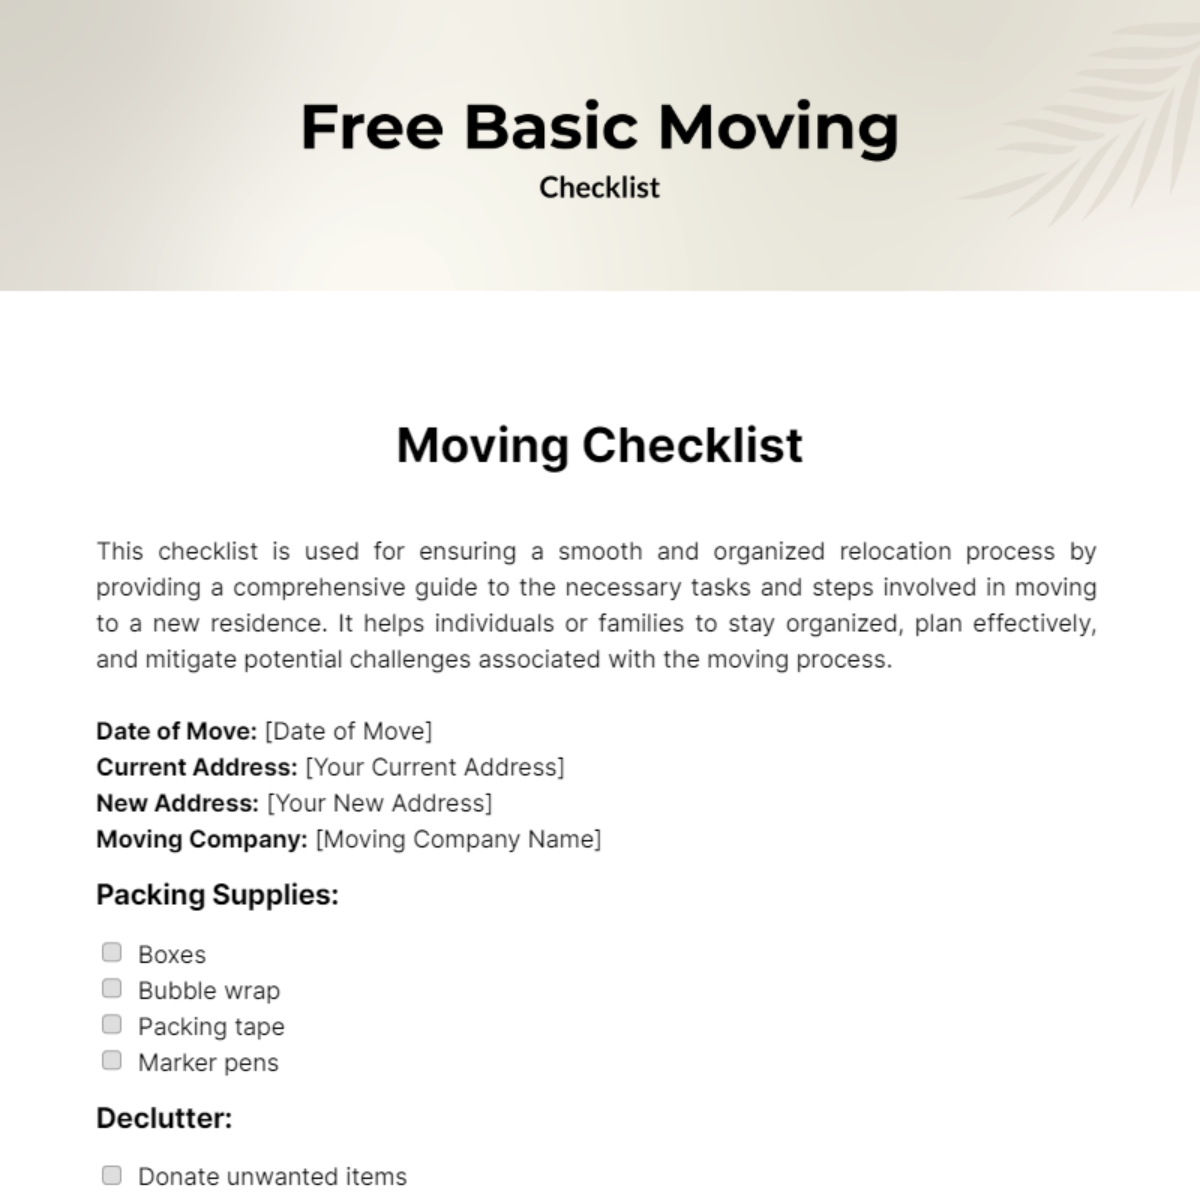 Free Basic Moving Checklist Template